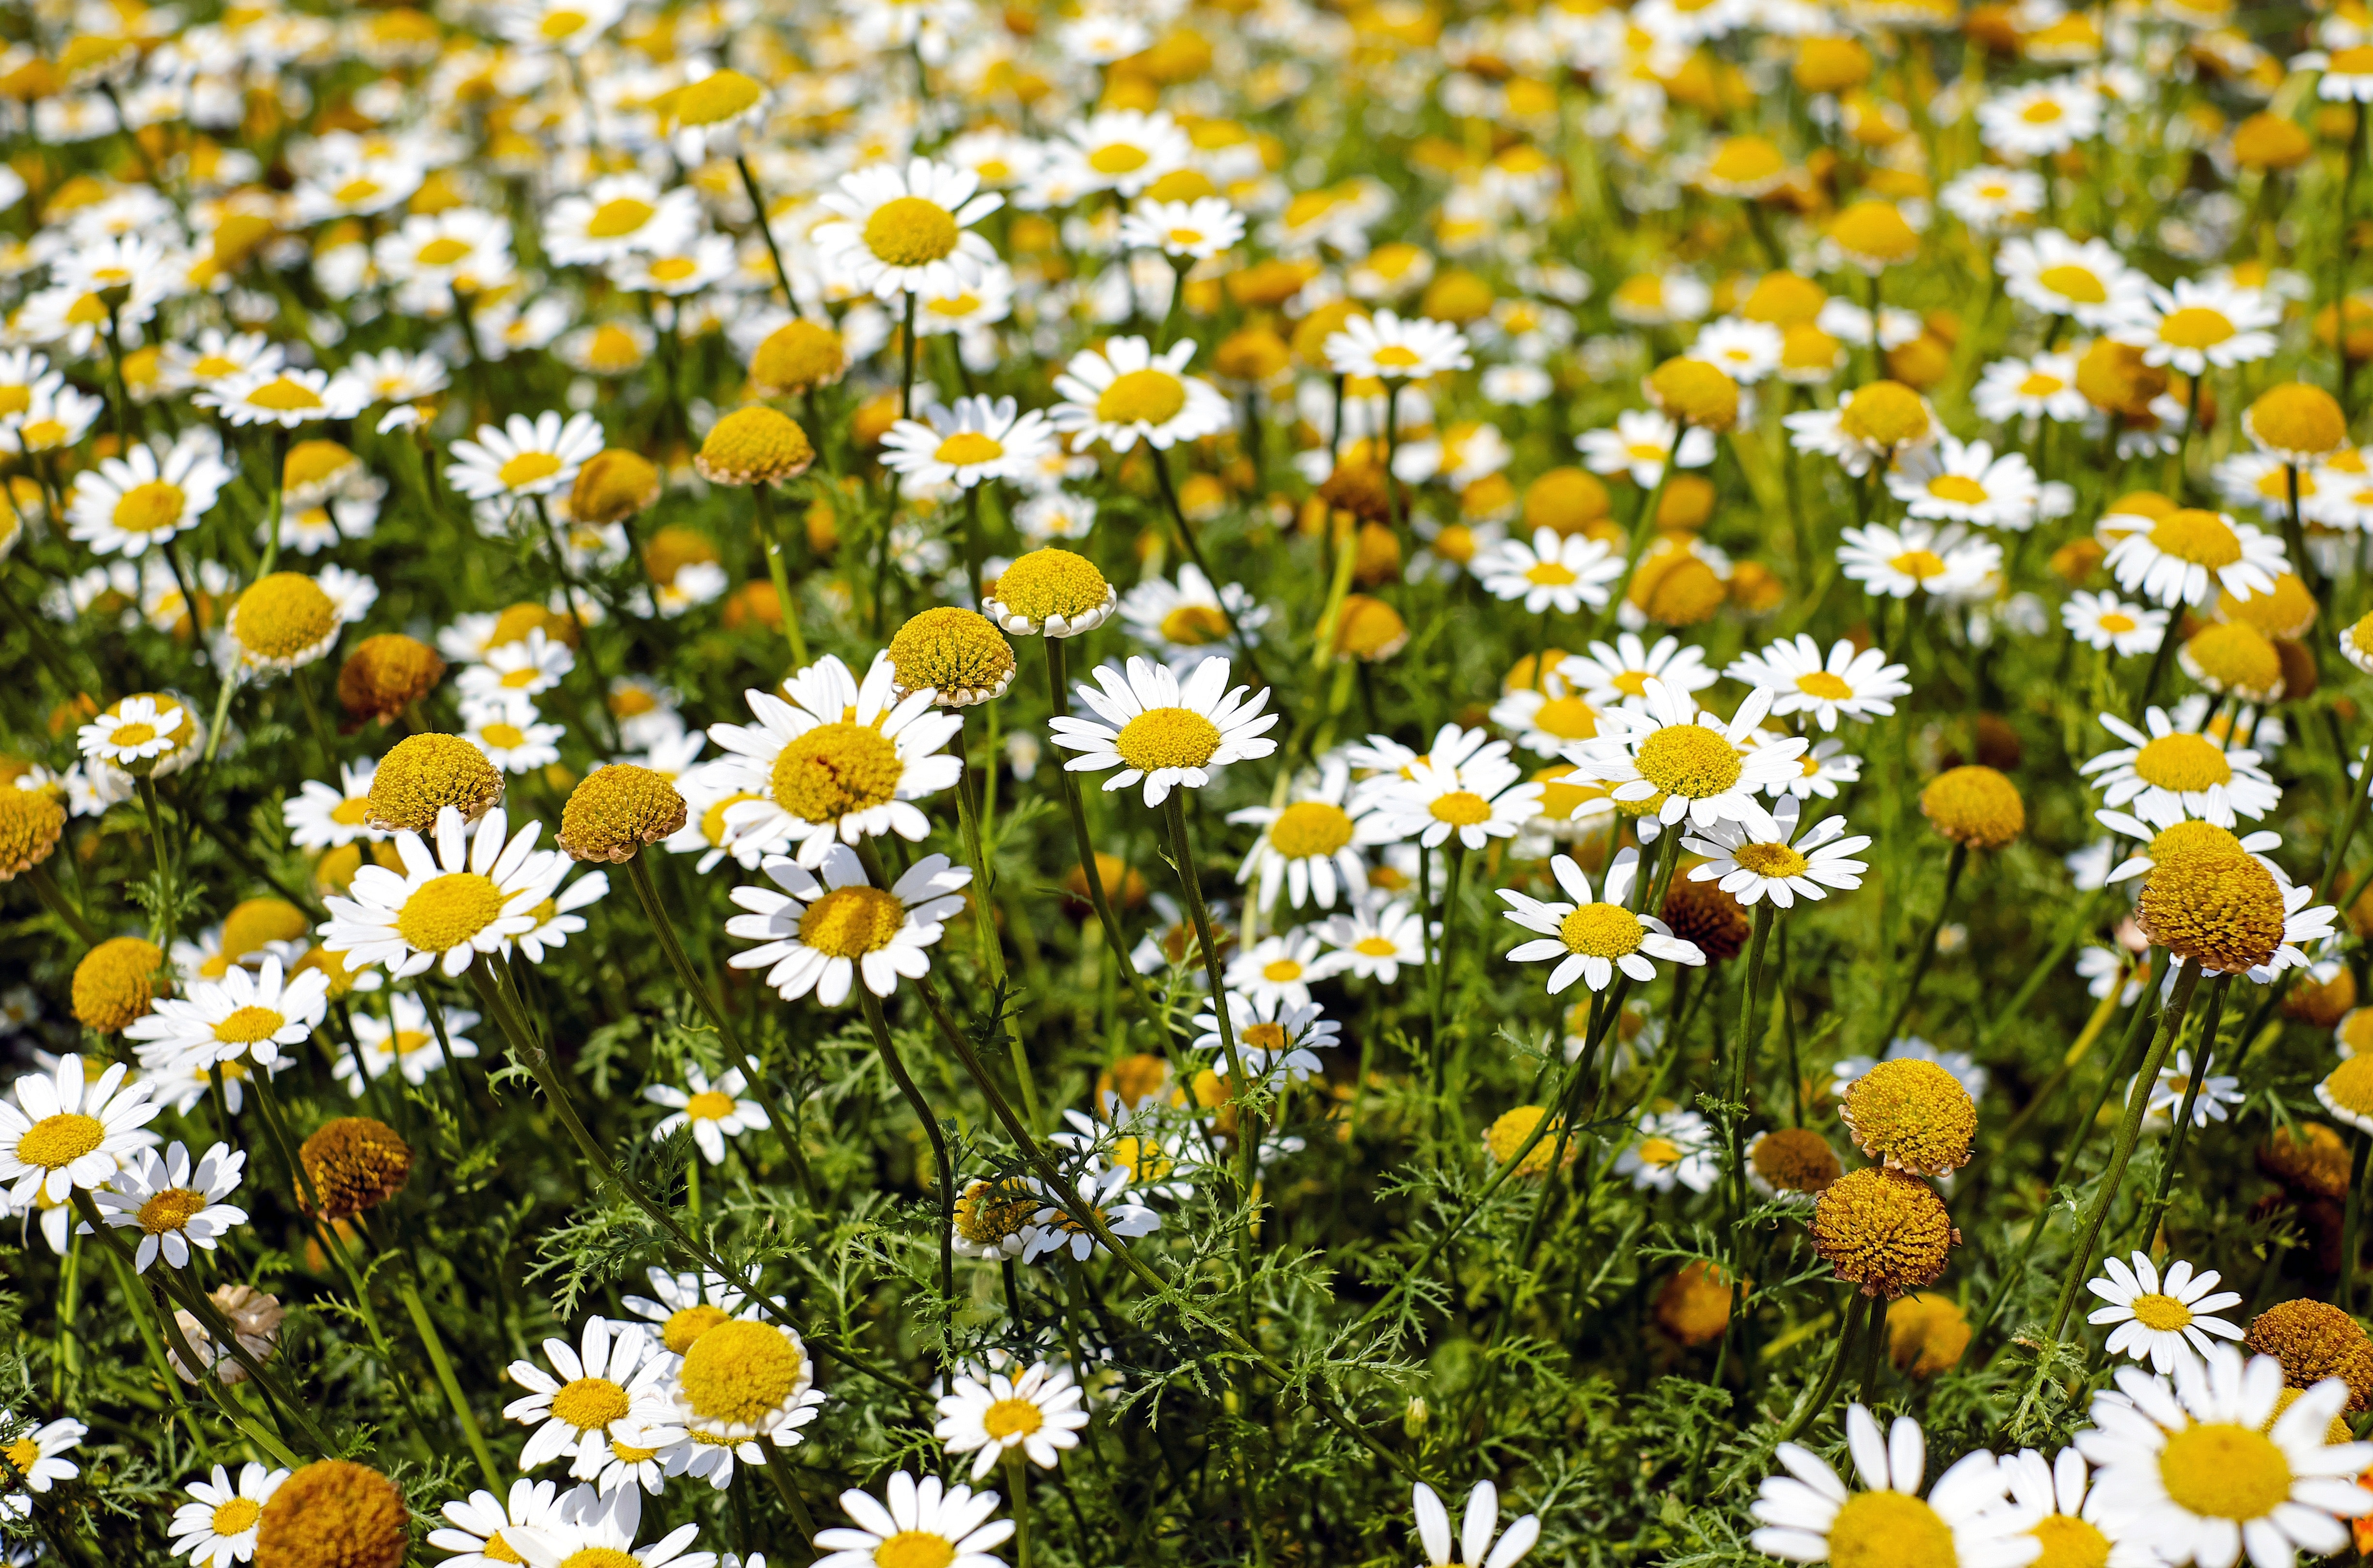 Shallow focus photography of yellow and white flowers during daytime